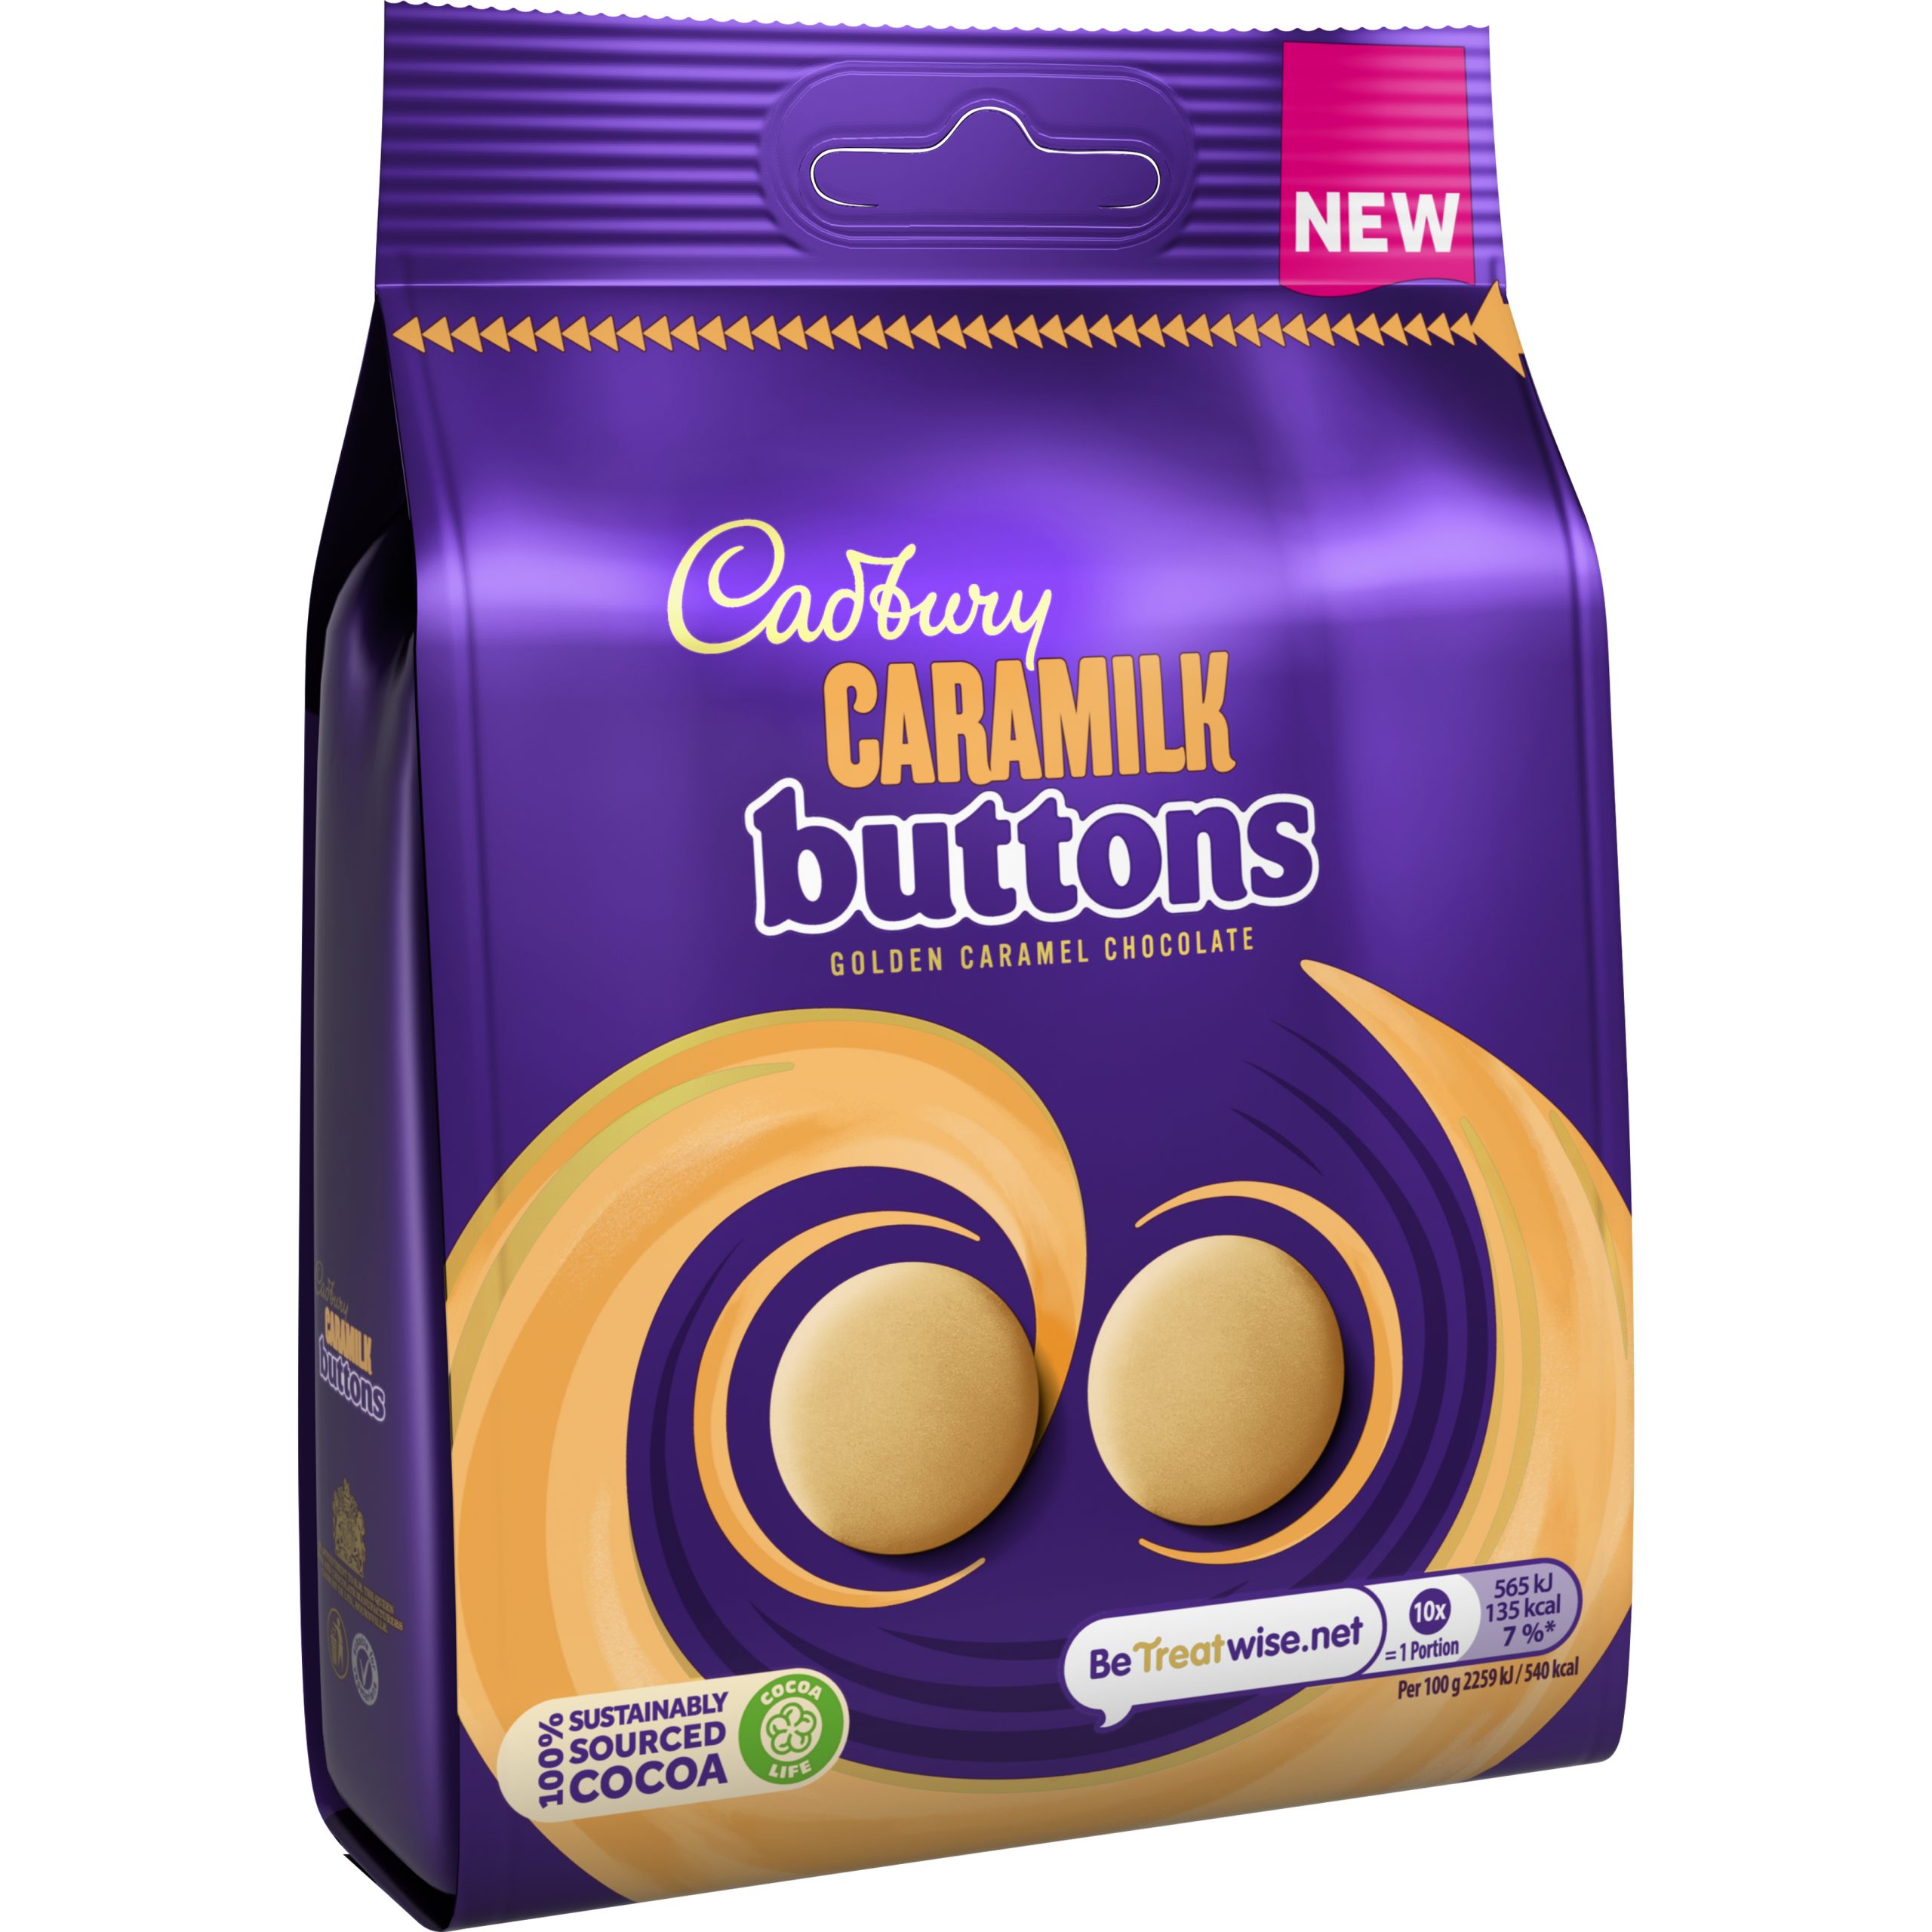 Cadbury expands Caramilk range with new Buttons launch